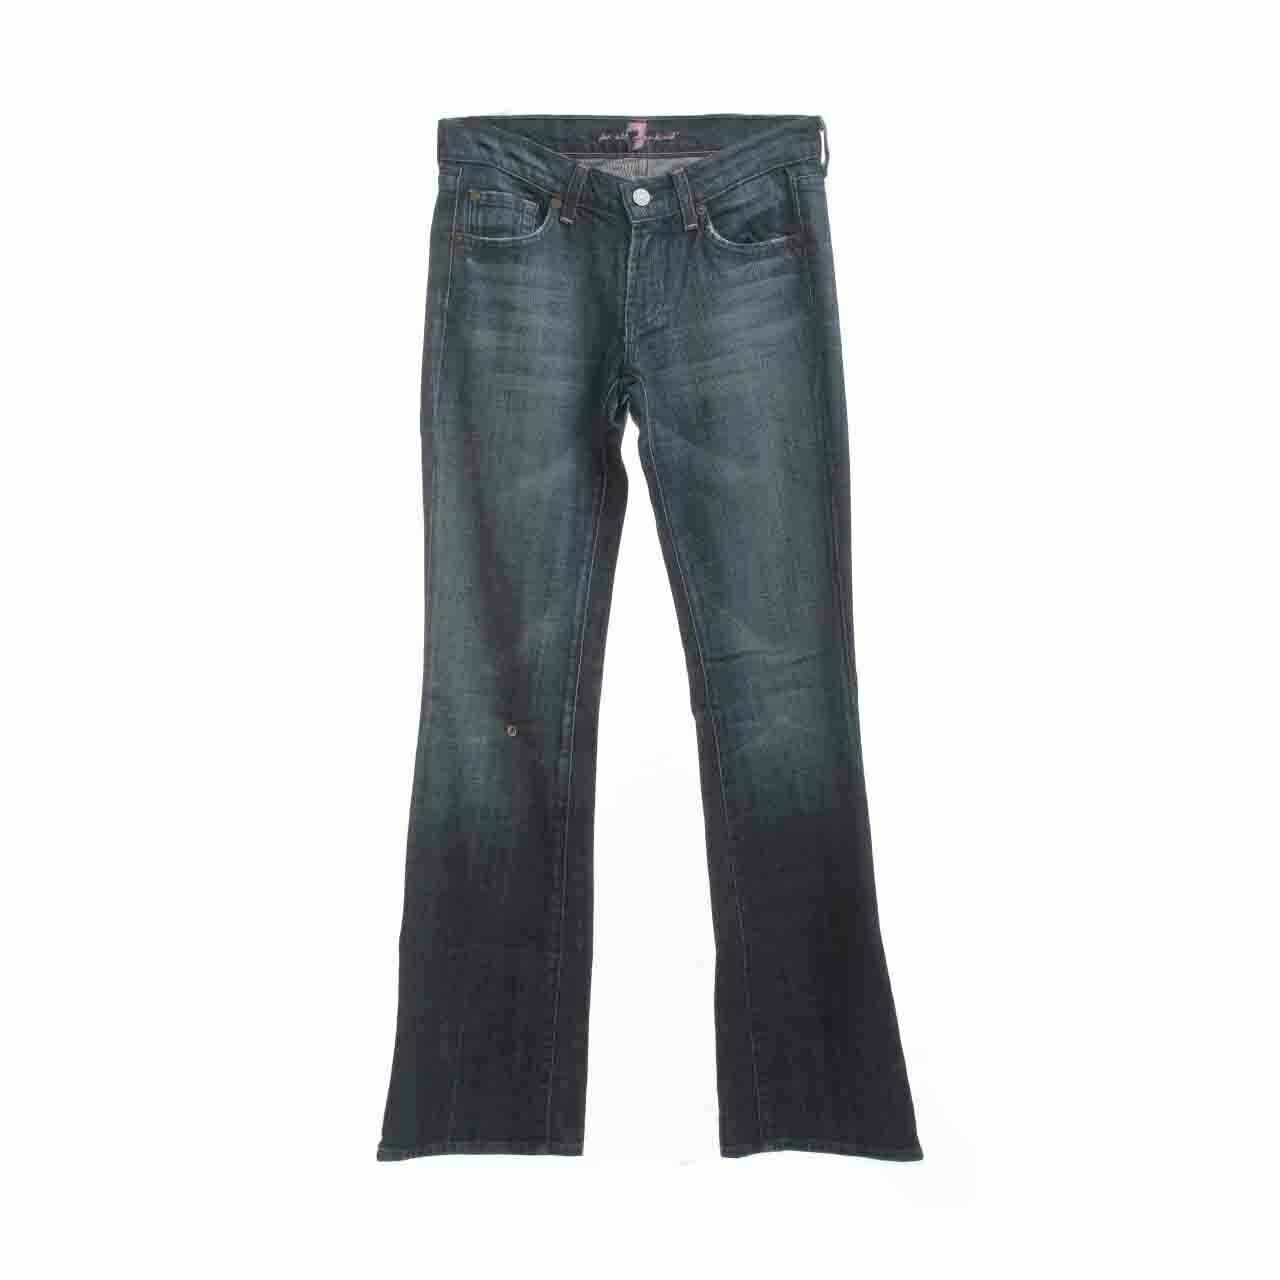 7 For All Mankind Navy Long Pants Jeans